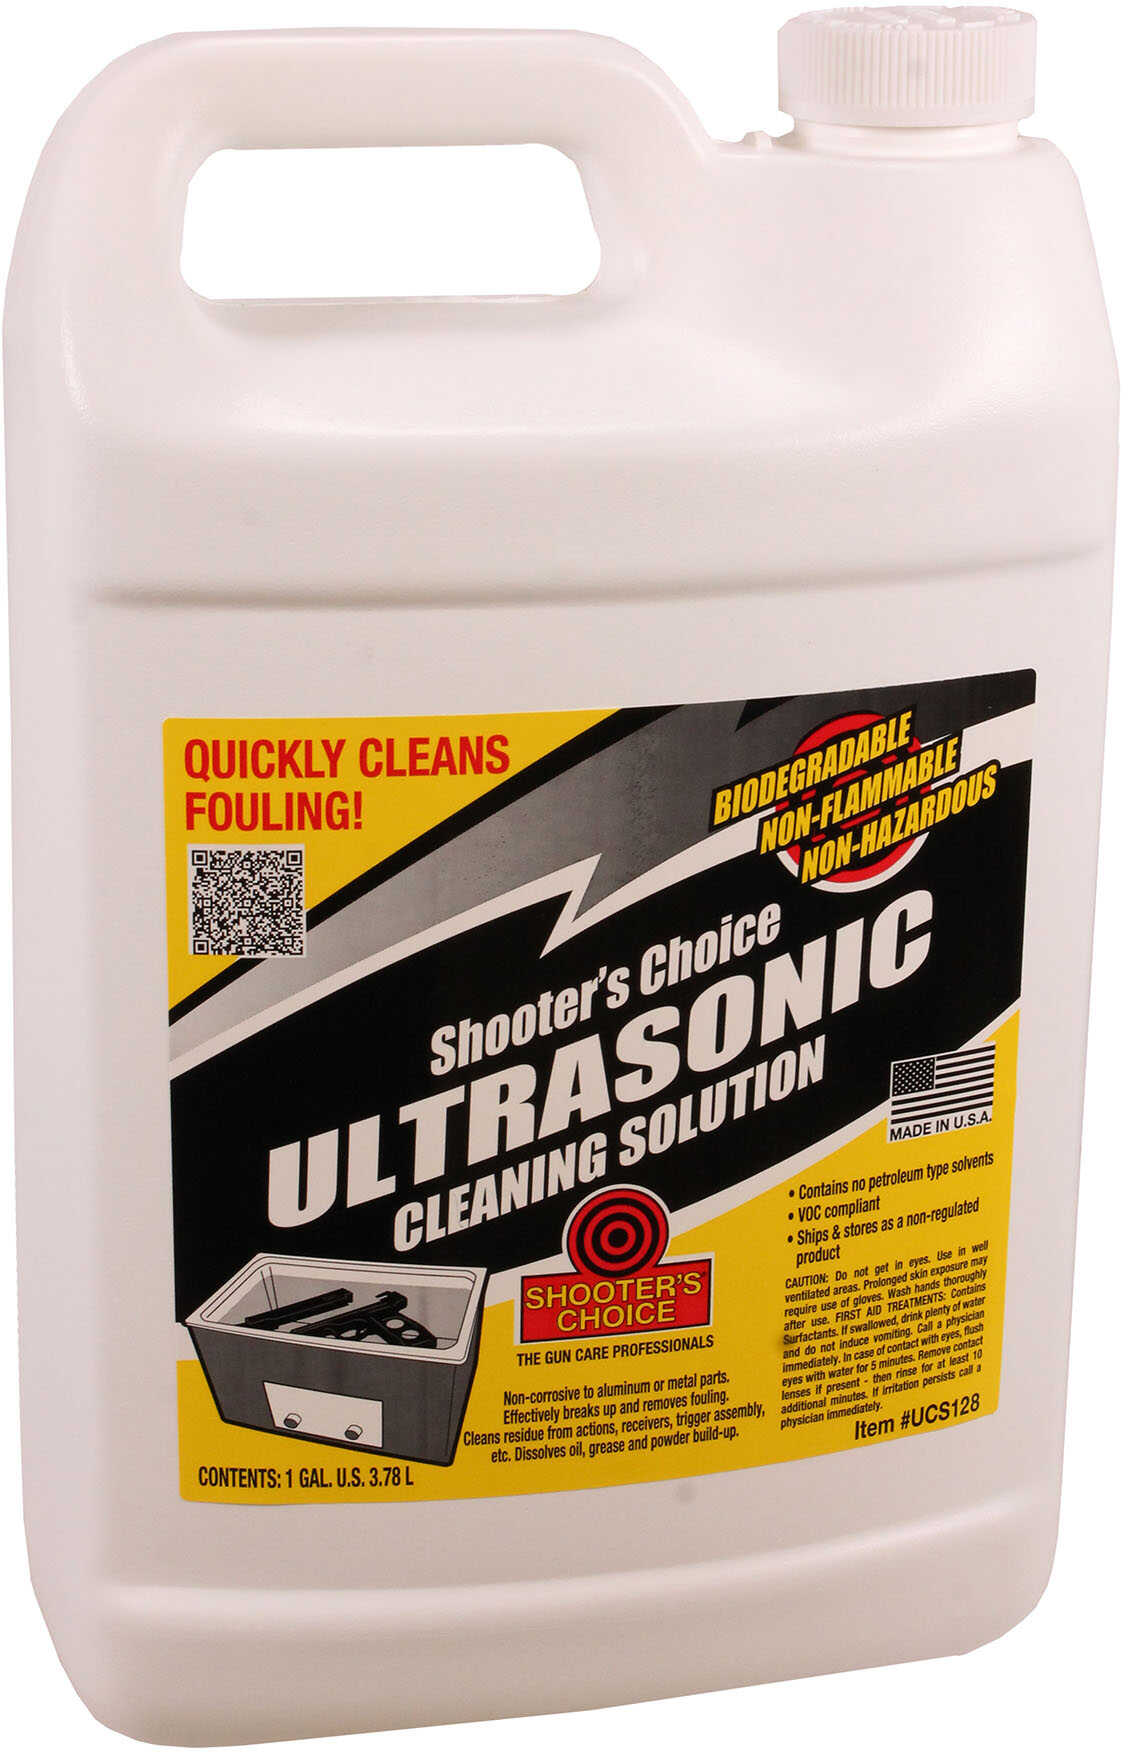 Shooter's Choice Ultrasonic Cleaning Solution, 1 Gallon Jug